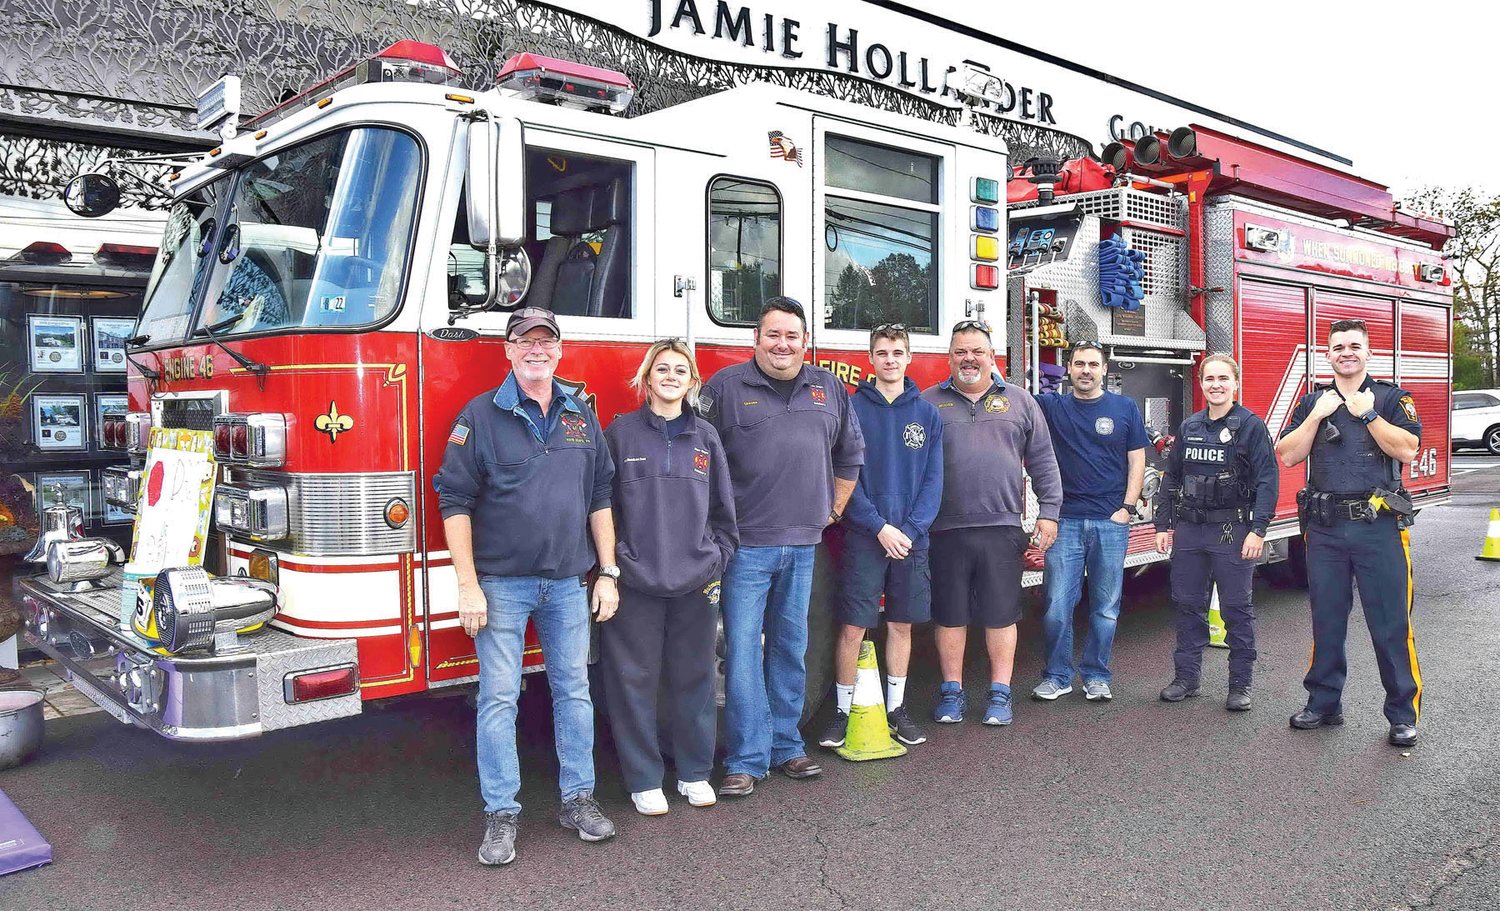 Members of the New Hope Eagle Fire Department, Solebury Township Police Department and the New Hope Borough Police Department assisted at the event.